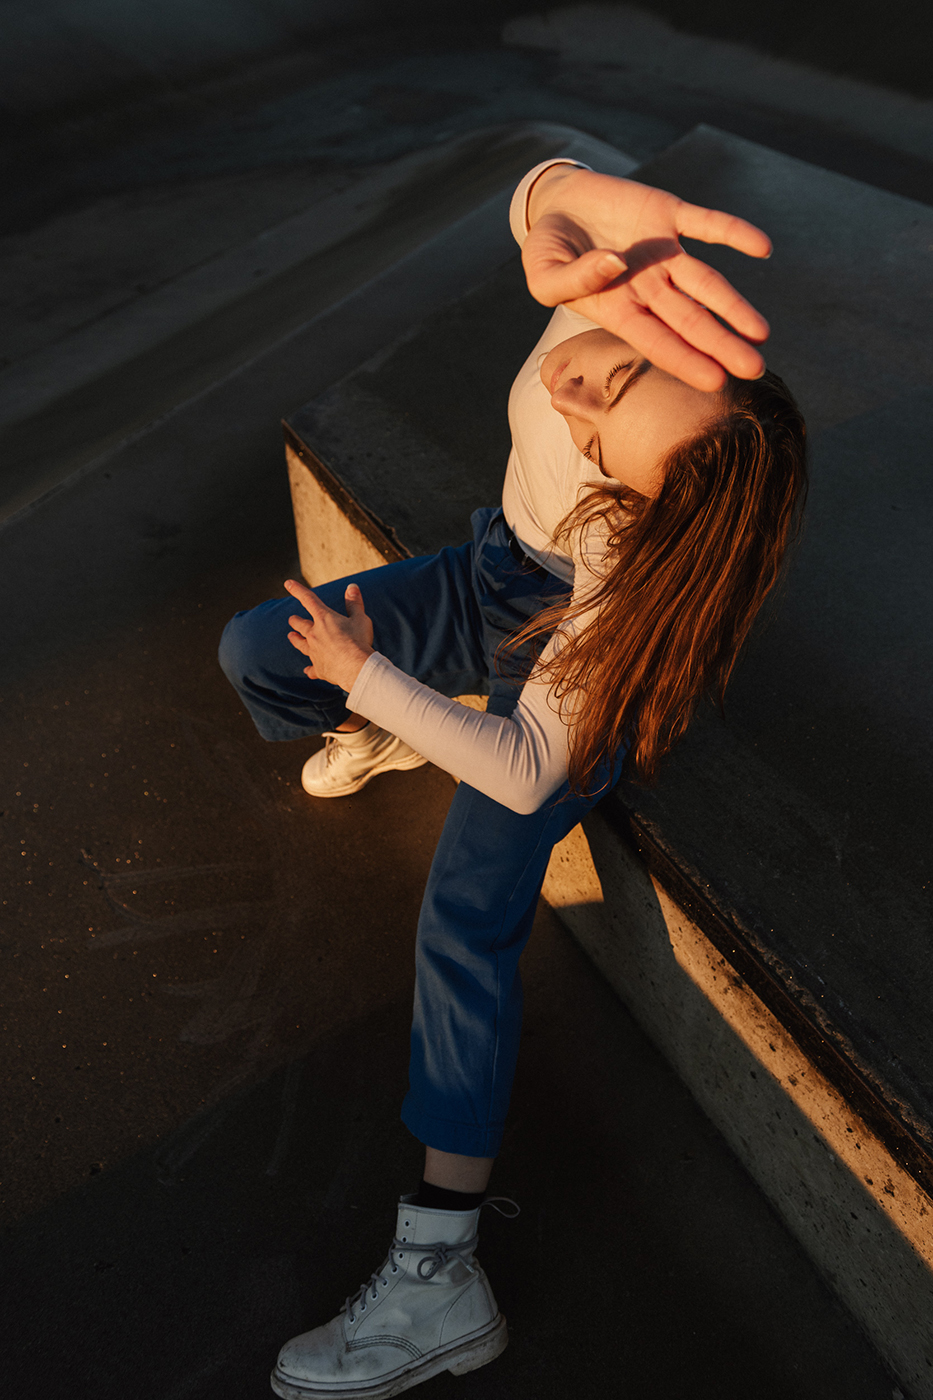 A person wearing a white long-sleeved shirt and jeans is dancing on the pavement in the sunlight.